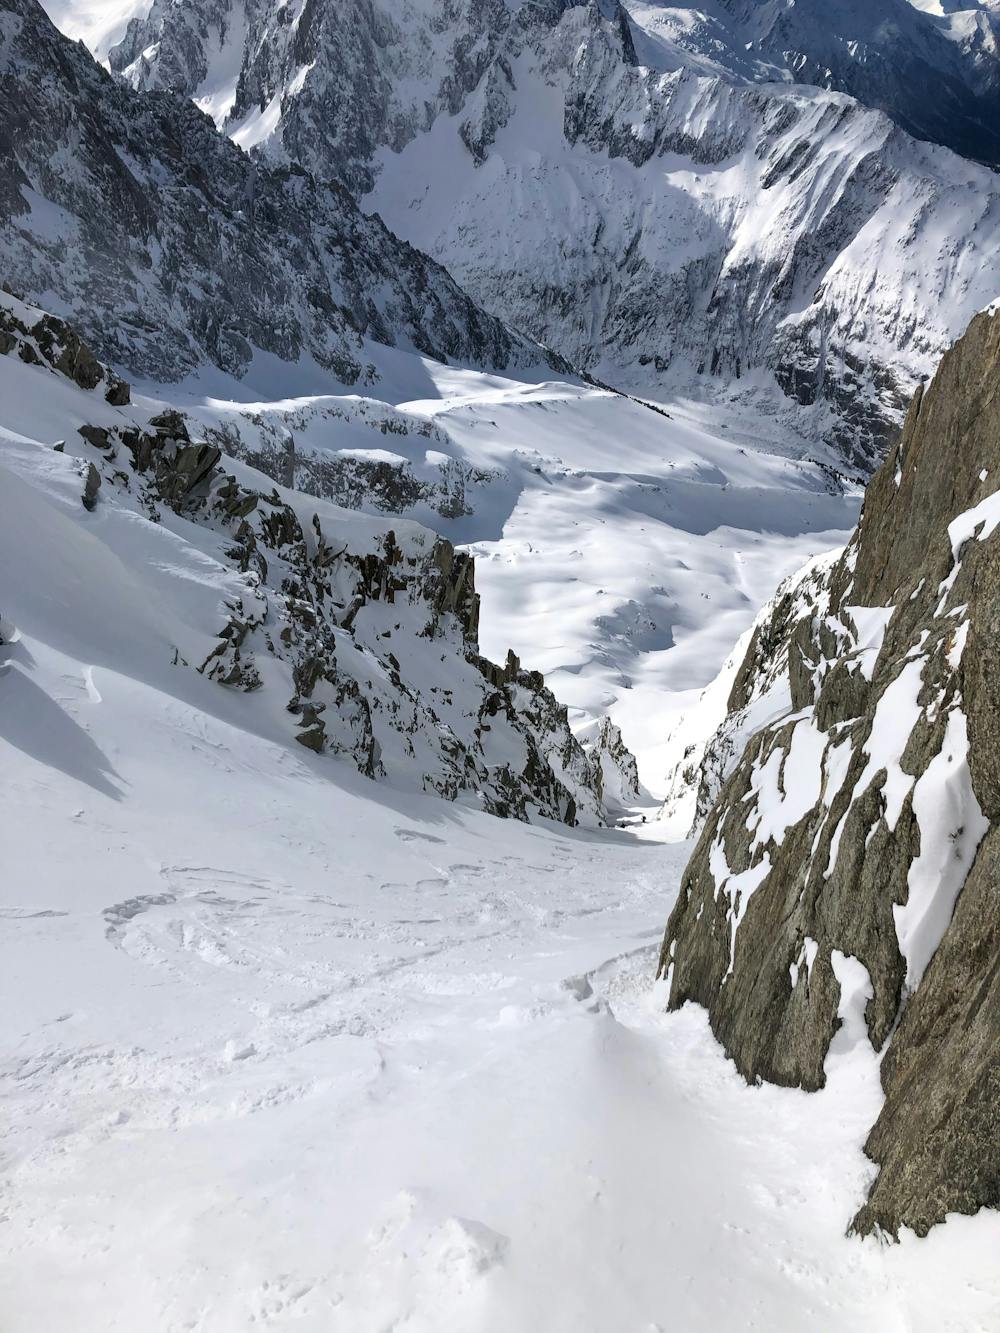 Looking down the upper section of the couloir